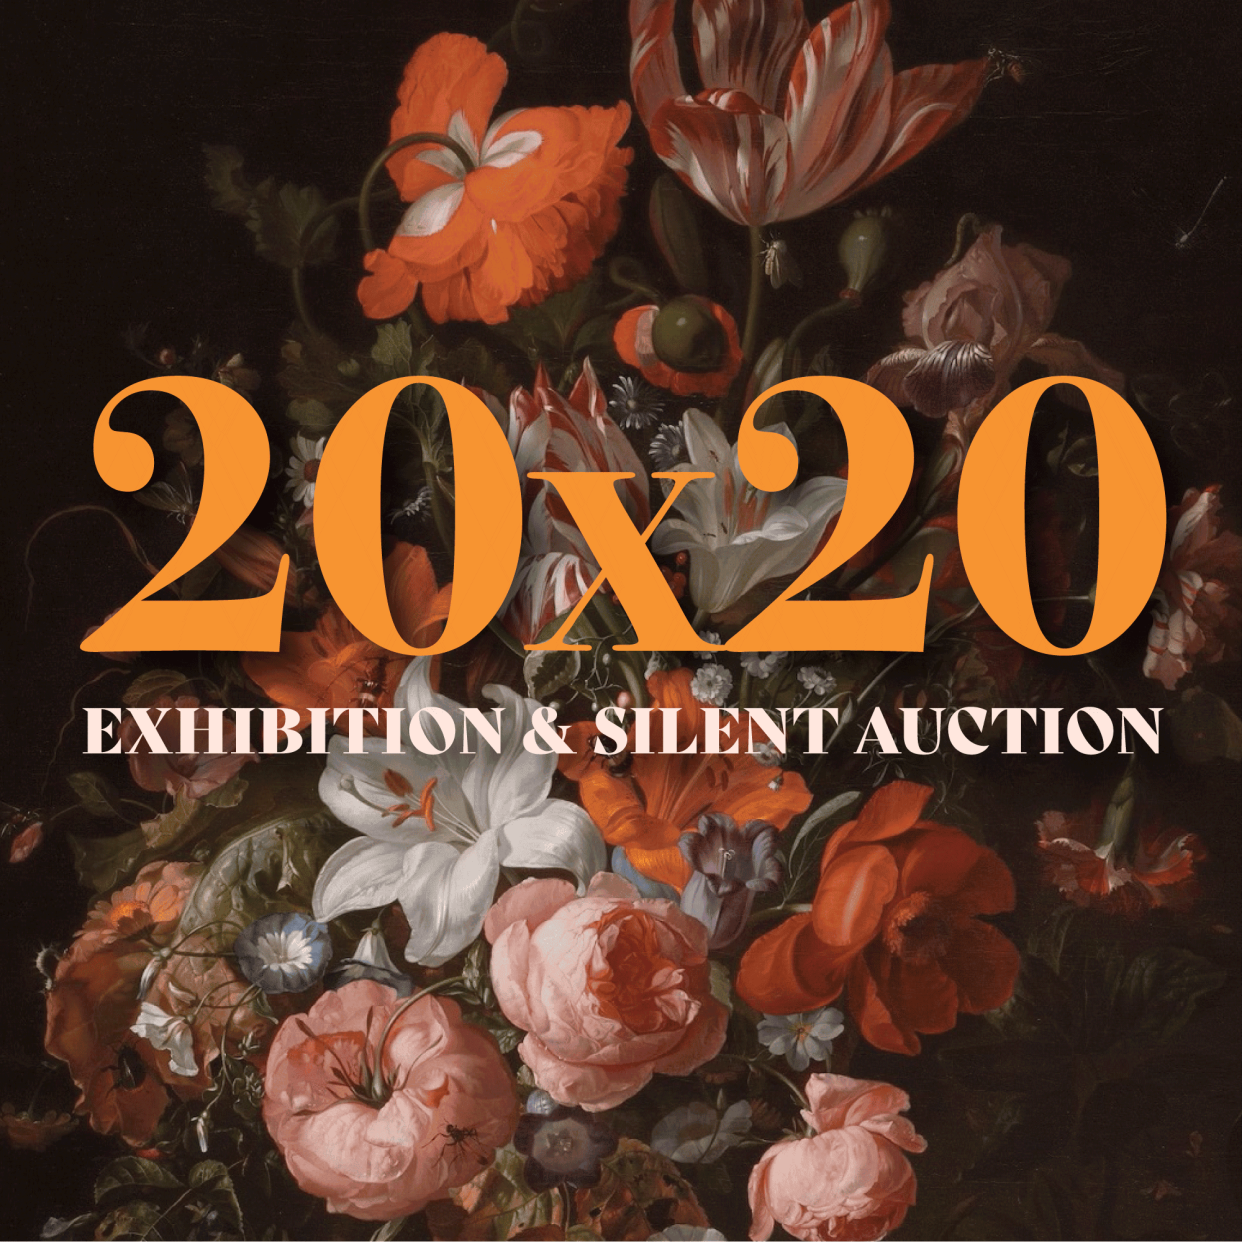 The Amarillo Museum of Art's (AMoA) 20x20 Exhibition & Silent Auction annual fundraiser is scheduled to take place March 22-28, with in-person viewing at the museum March 27-28.